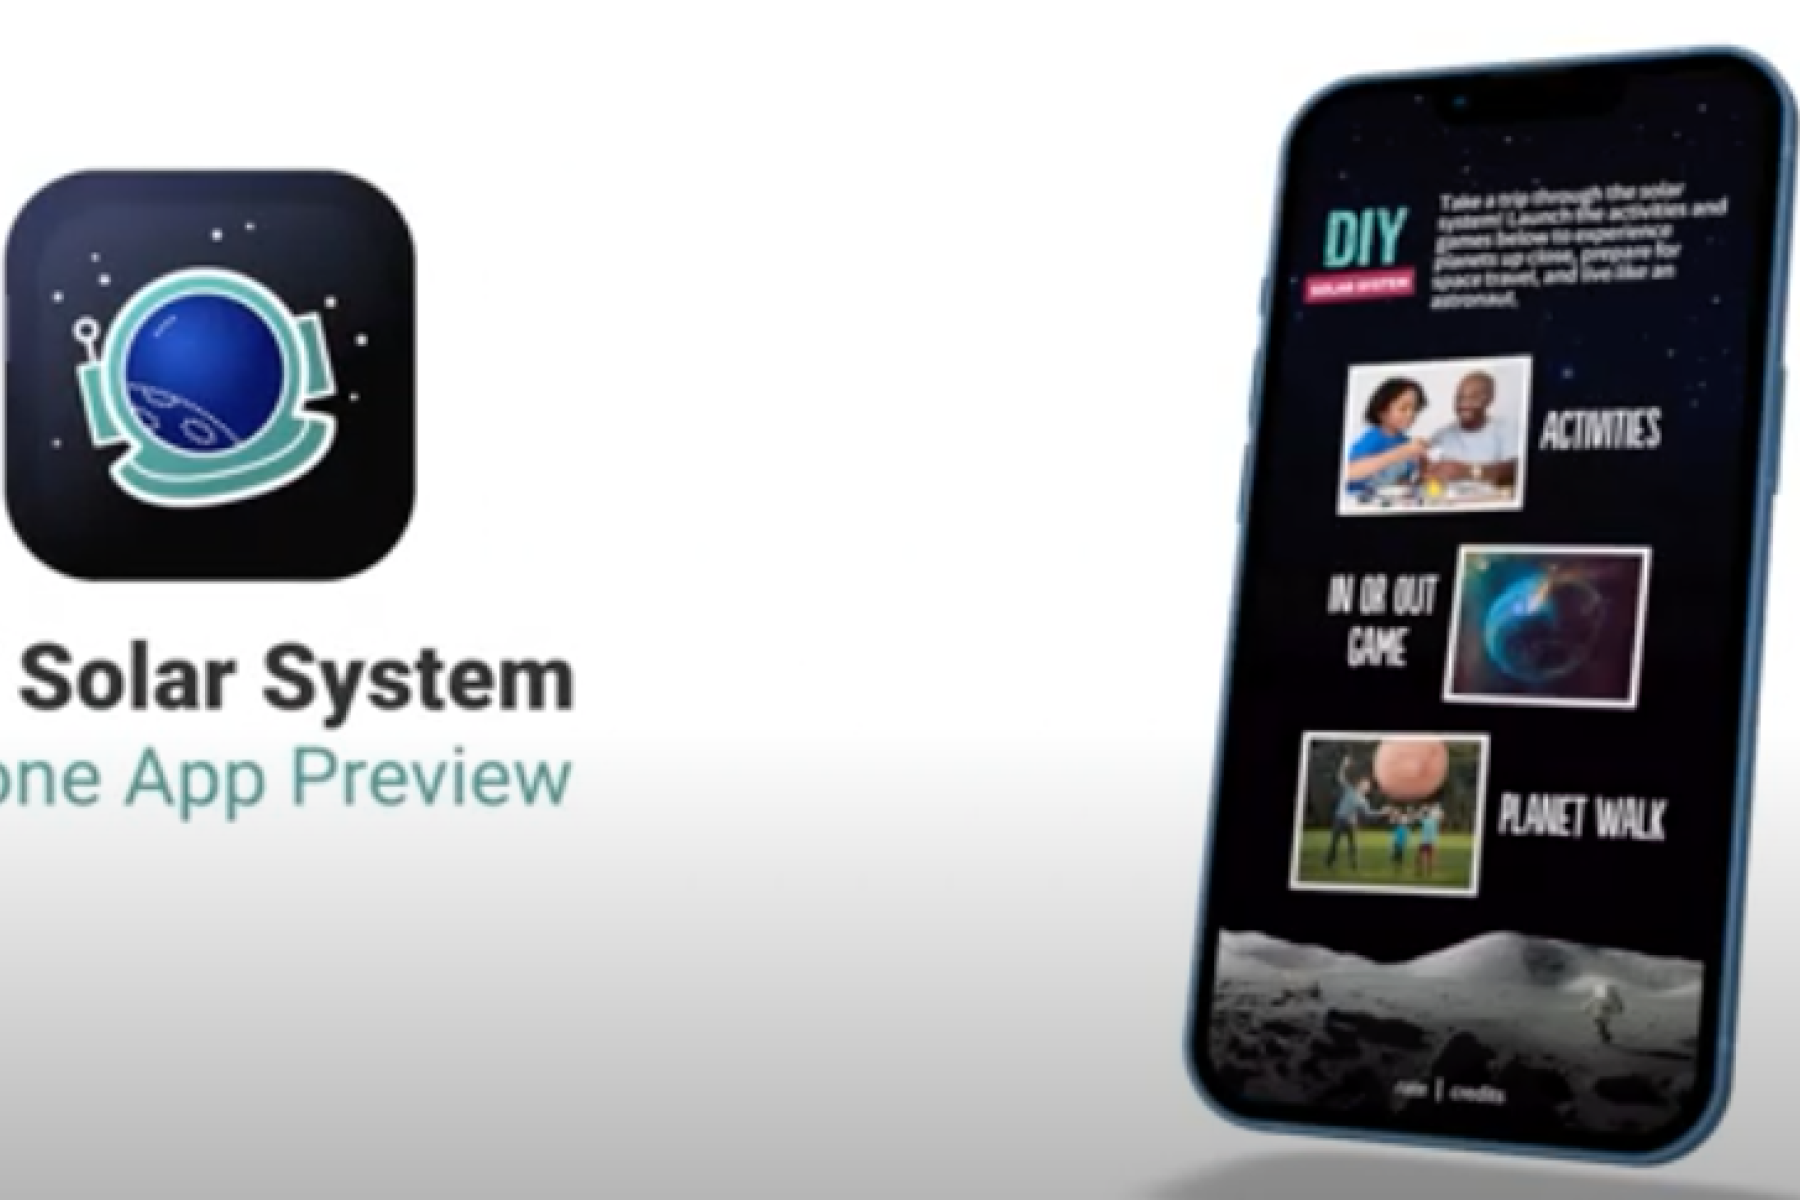 DIY Solar System app preview video screenshot showing interactive app on iphone